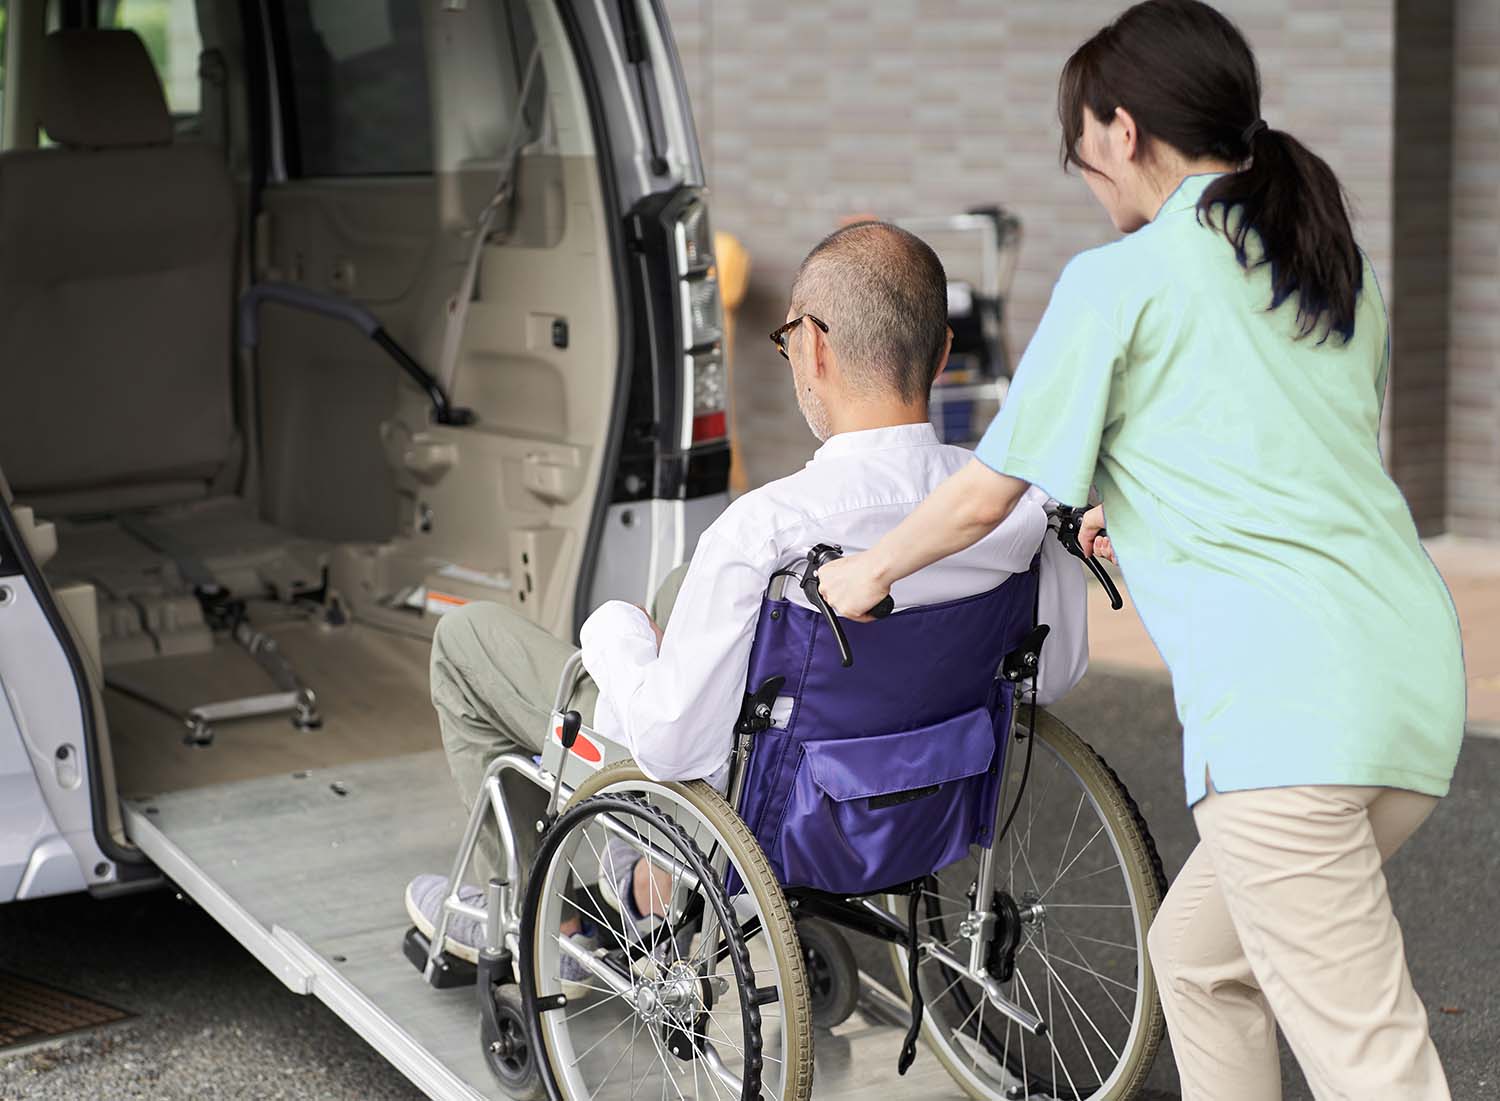 Careworker helping client into transport